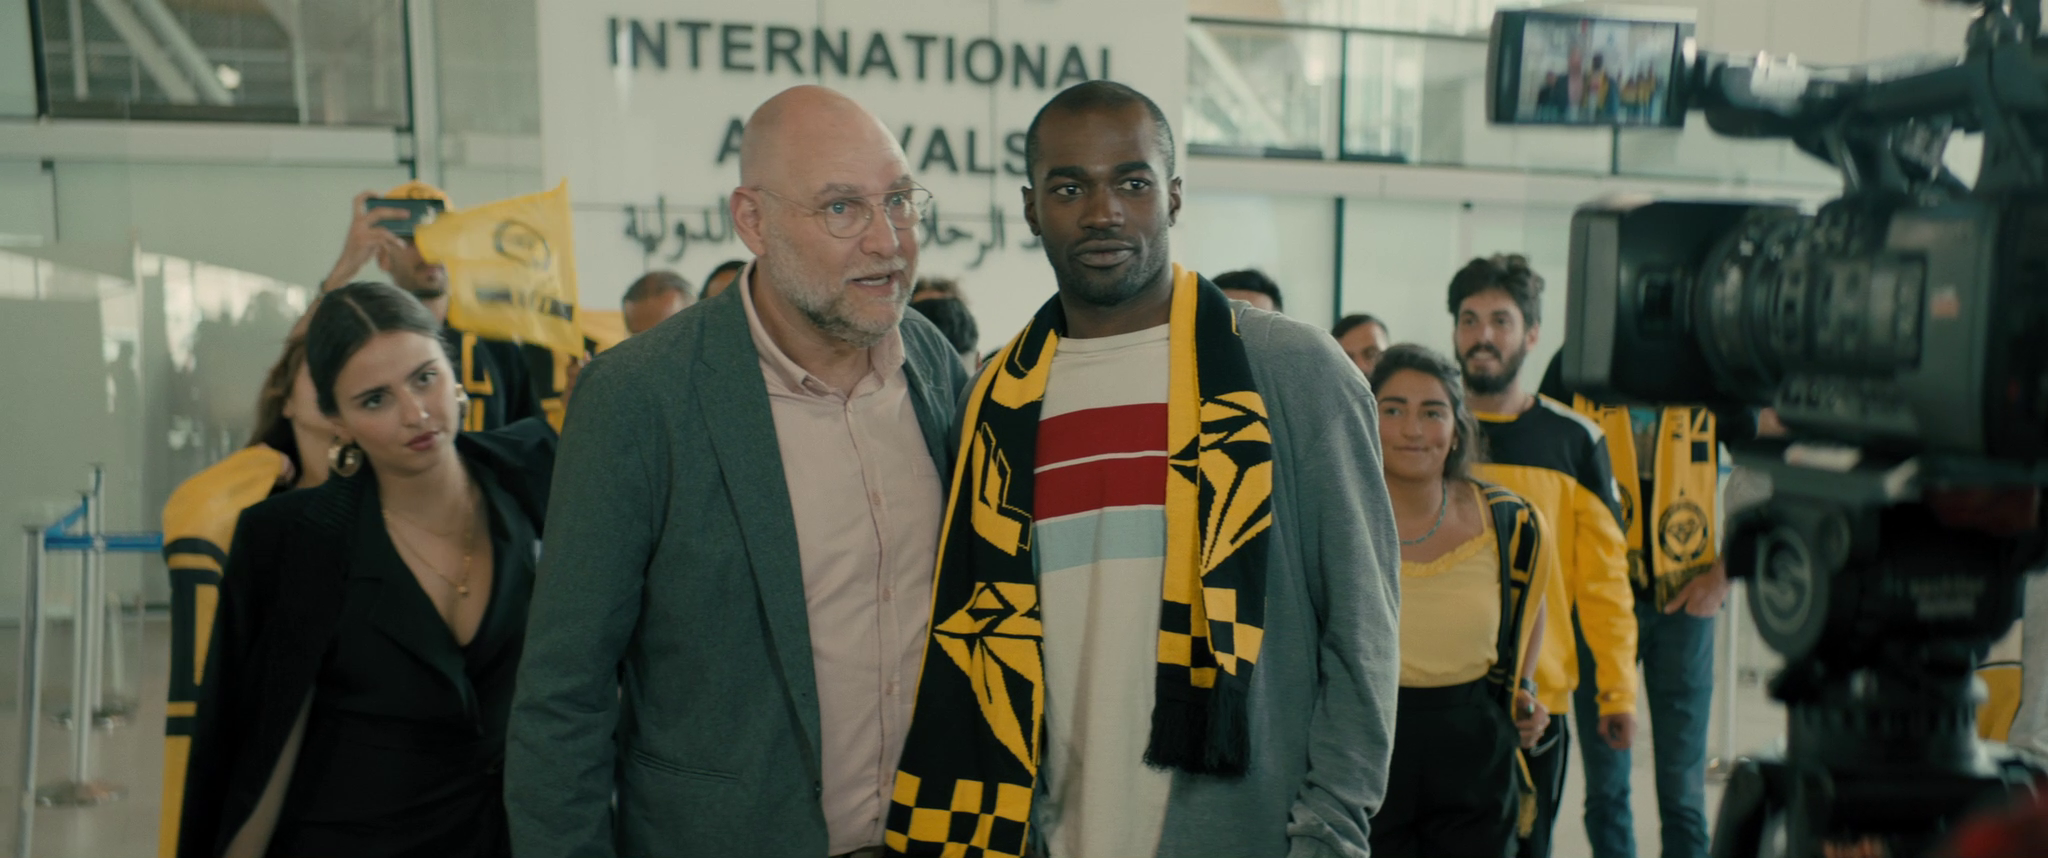 In an airport, a young Eritrean man with a black-and-yellow sports team scarf on his shoulders is surrounded by people and looks into a large professional video camera at the edge of the frame.